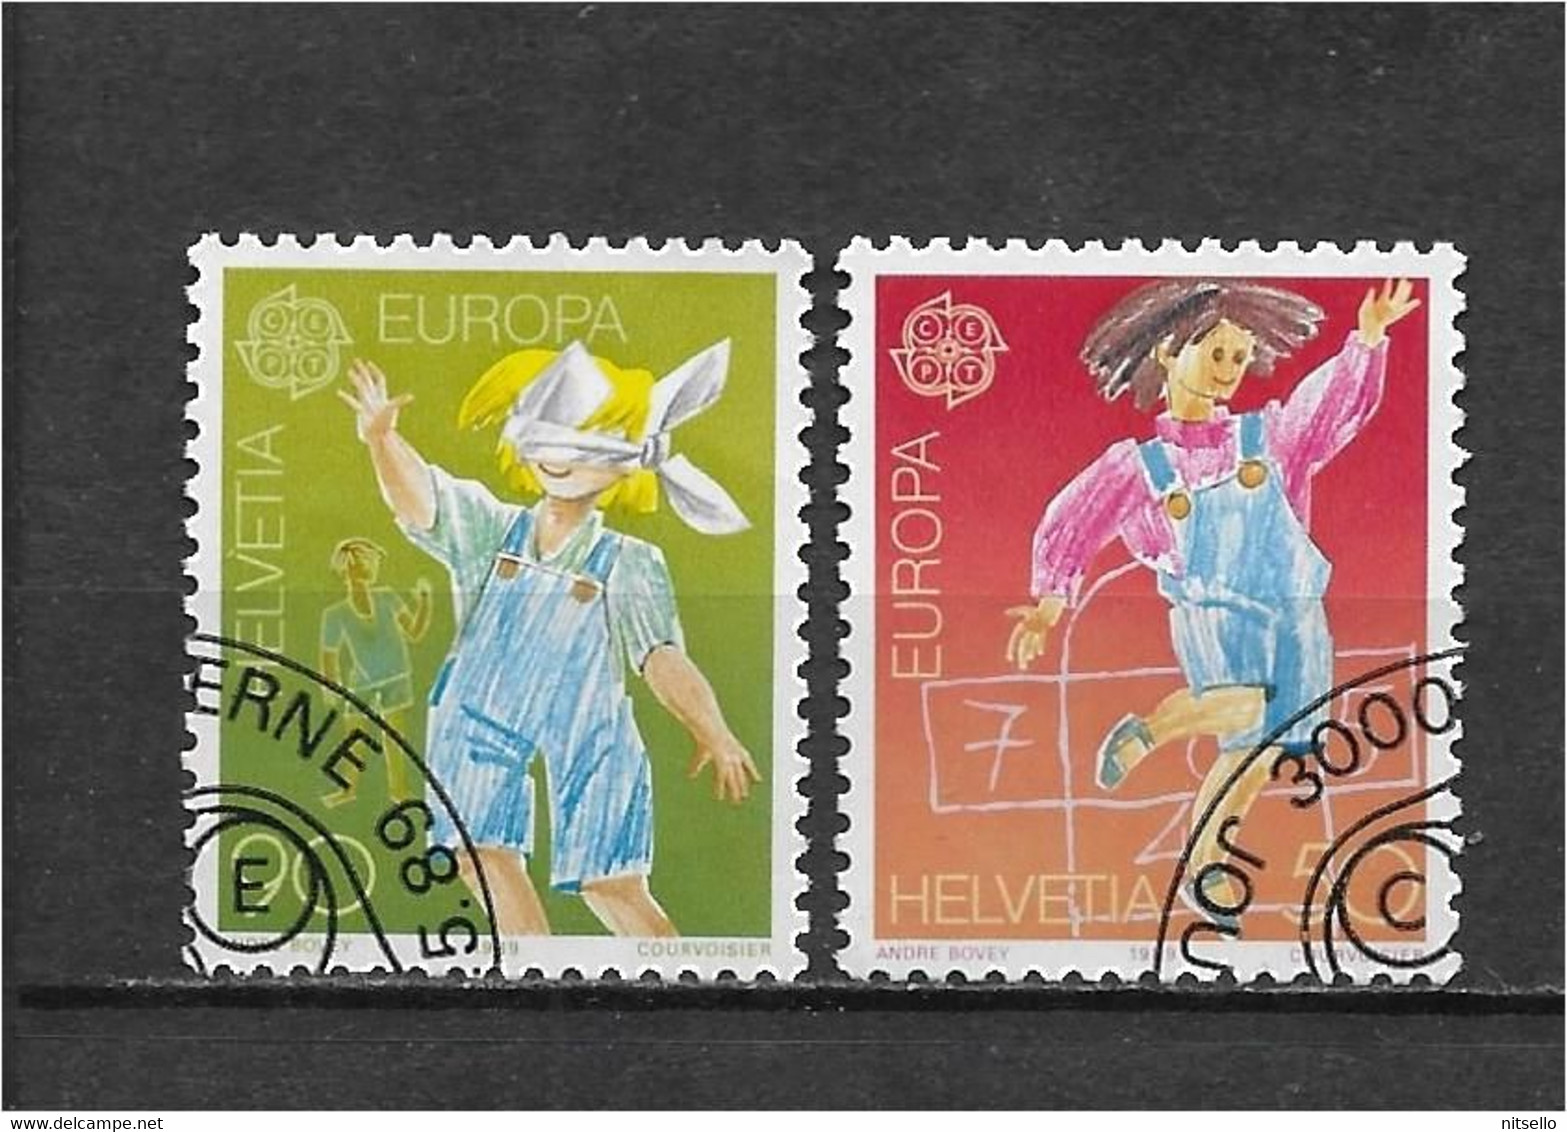 LOTE 1530A  ///  SUIZA   YVERT Nº: 1323/1324   ¡¡¡ OFERTA - LIQUIDATION - JE LIQUIDE !!! - Used Stamps